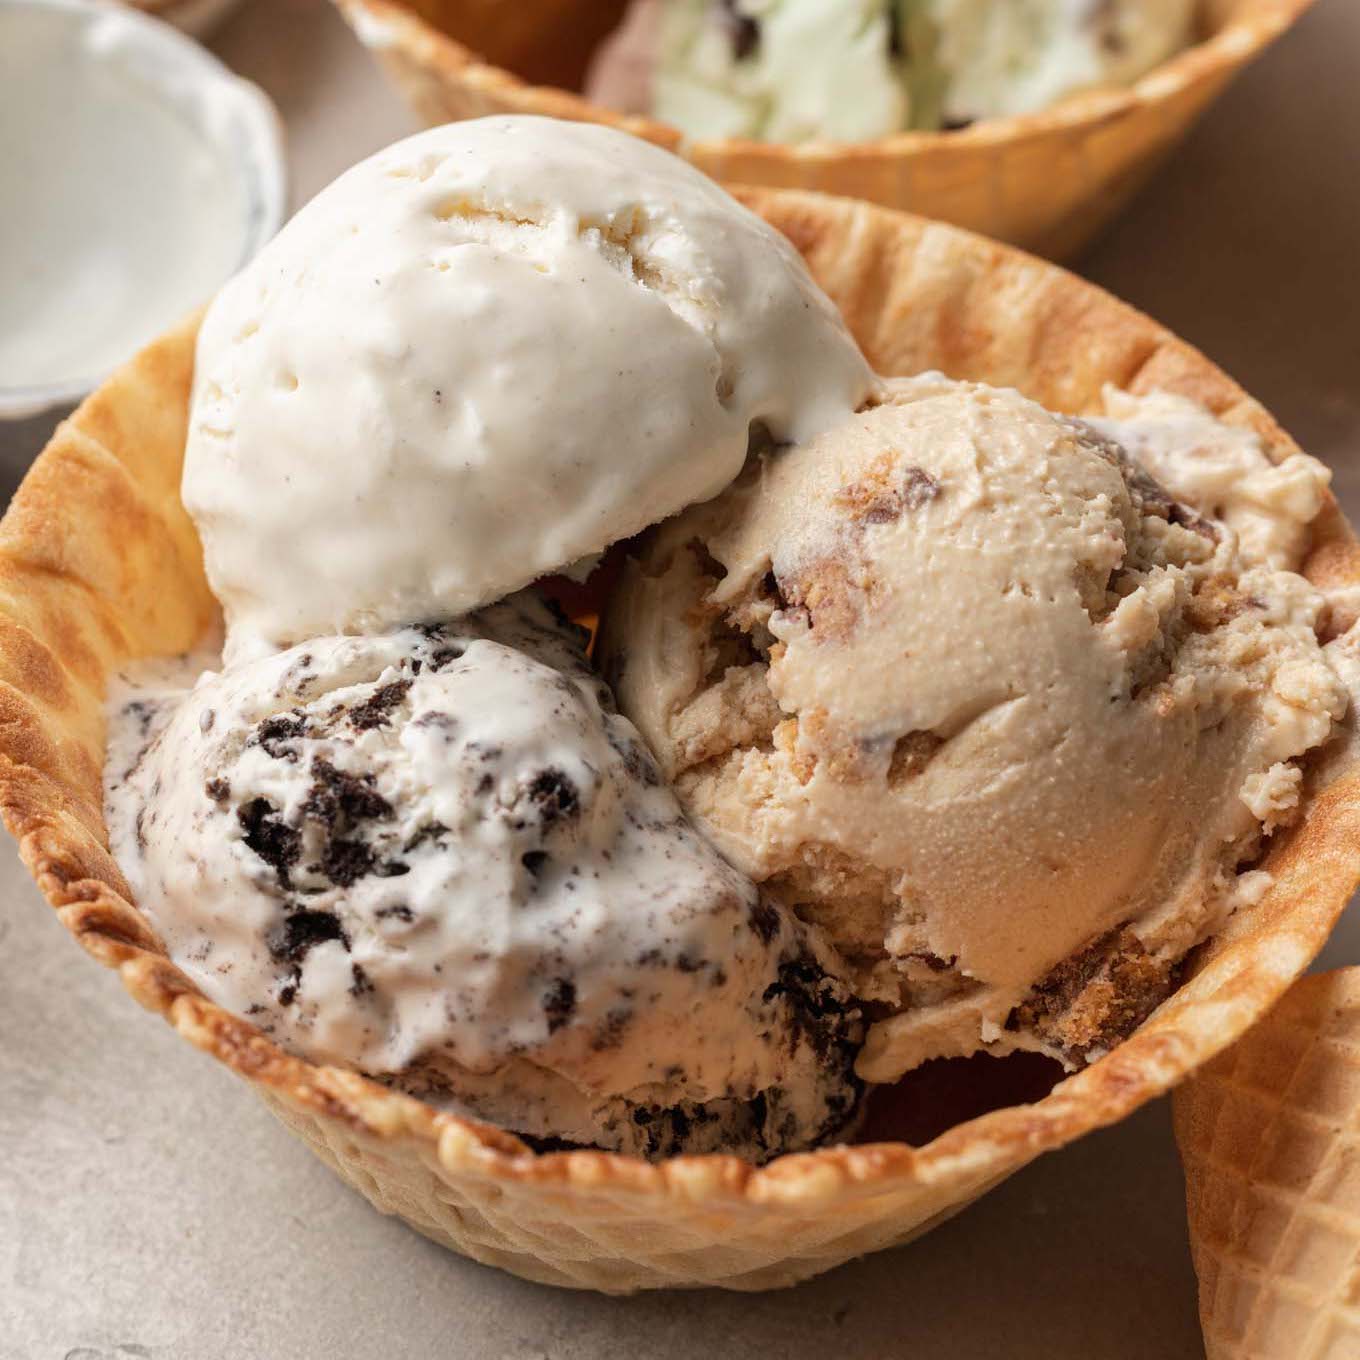 How To Make No Churn Ice Cream - with flavor and mix-in ideas